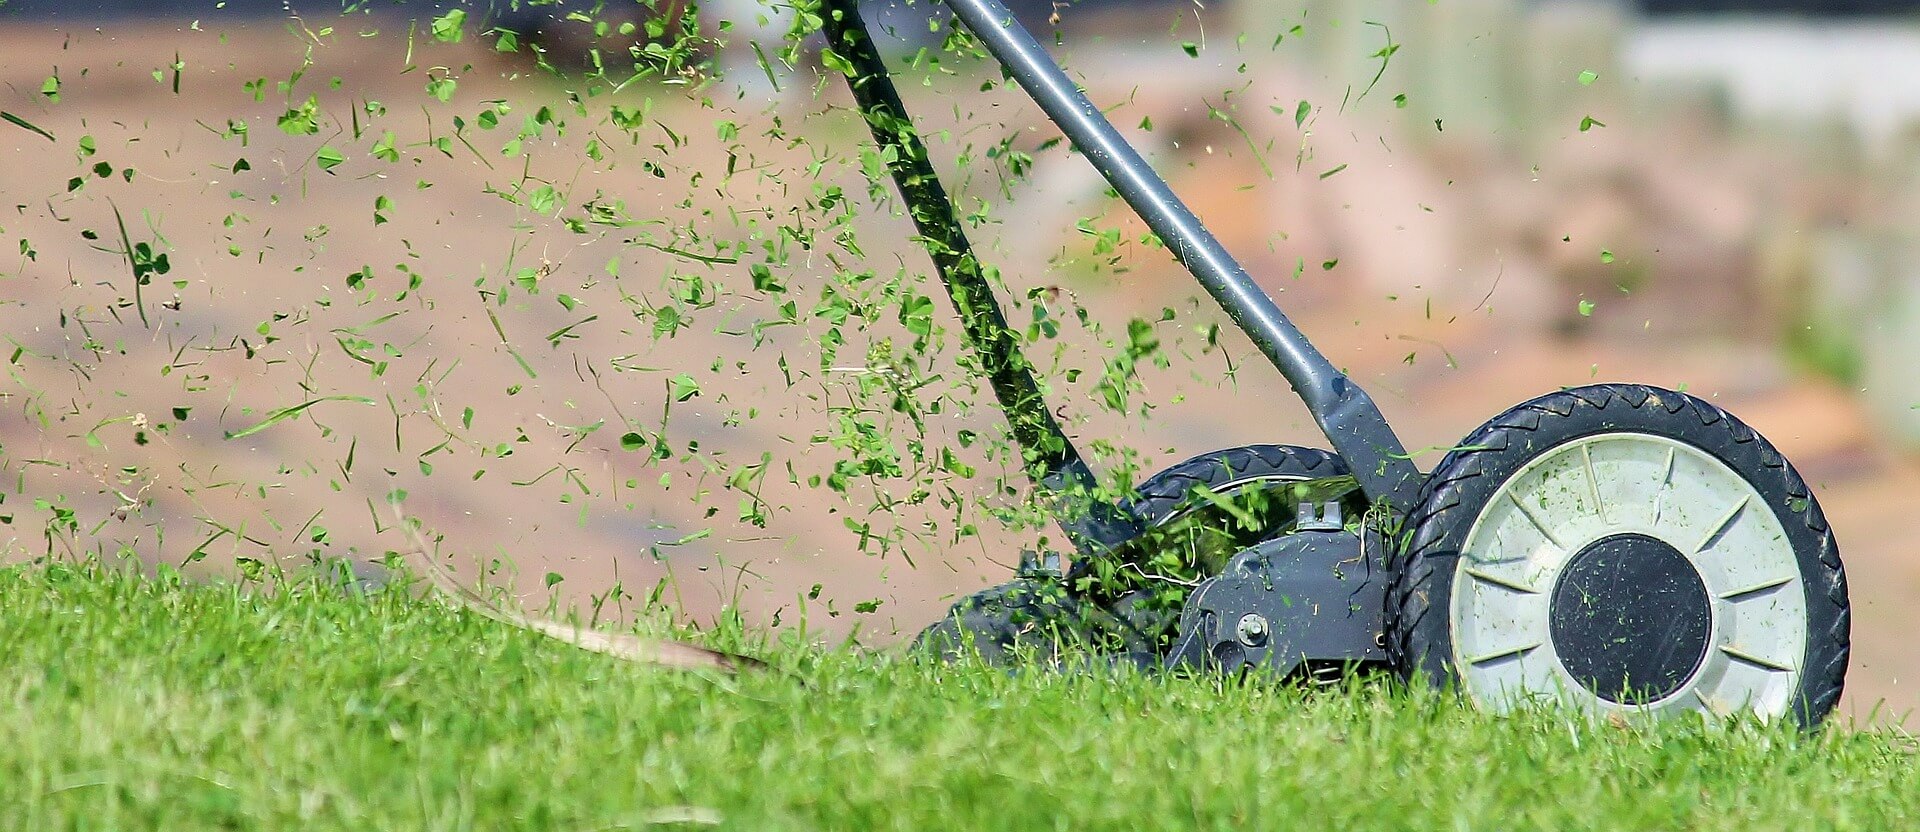 How to Keep Lawn Edges Neat